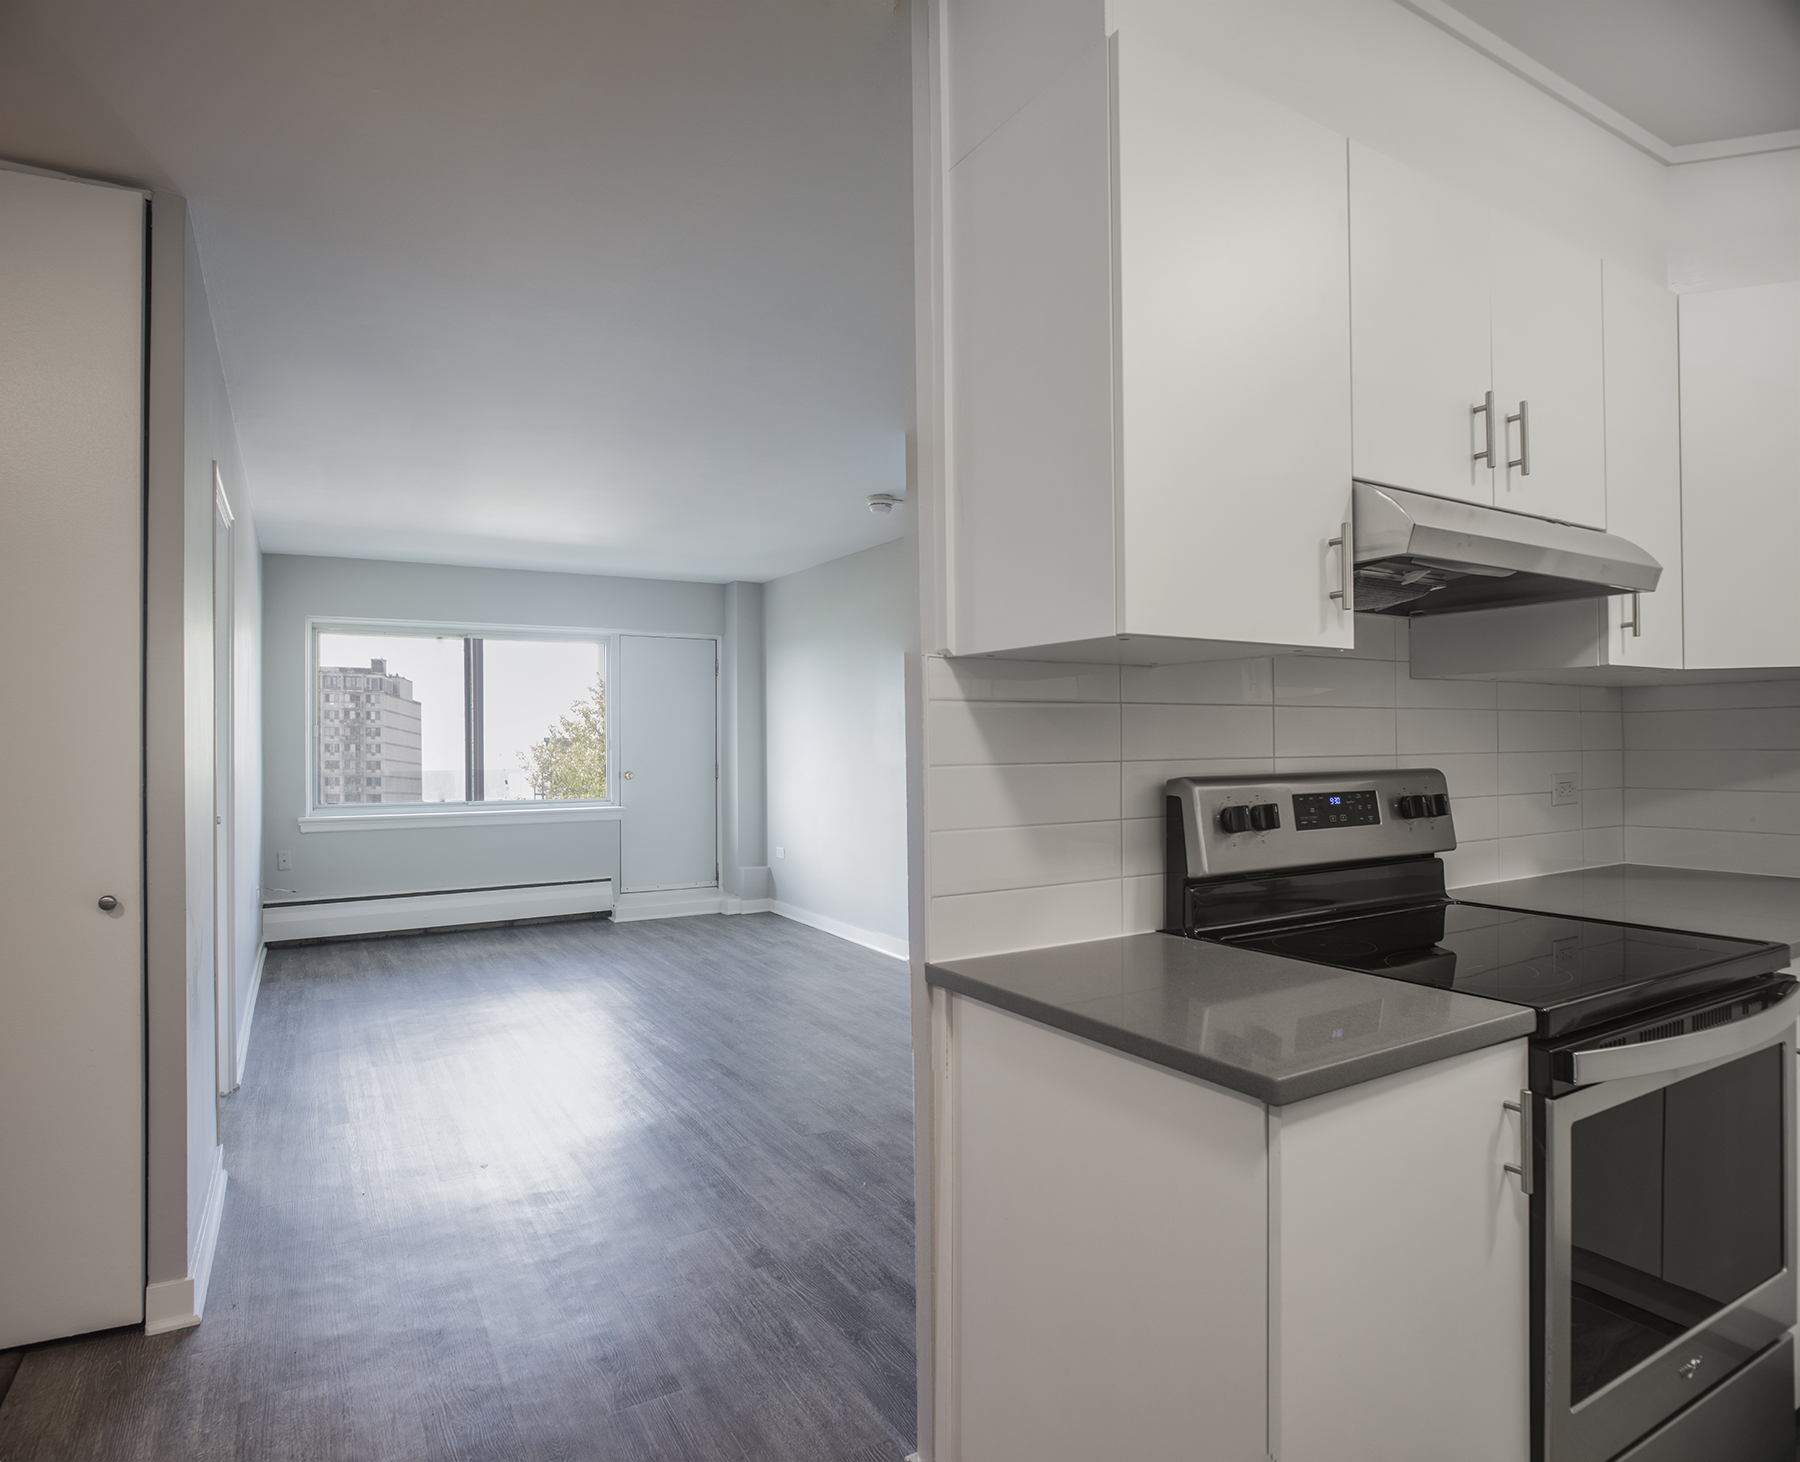 1 bedroom Apartments for rent in Montreal (Downtown) at Le Marco Appartements - Photo 06 - RentQuebecApartments – L401545